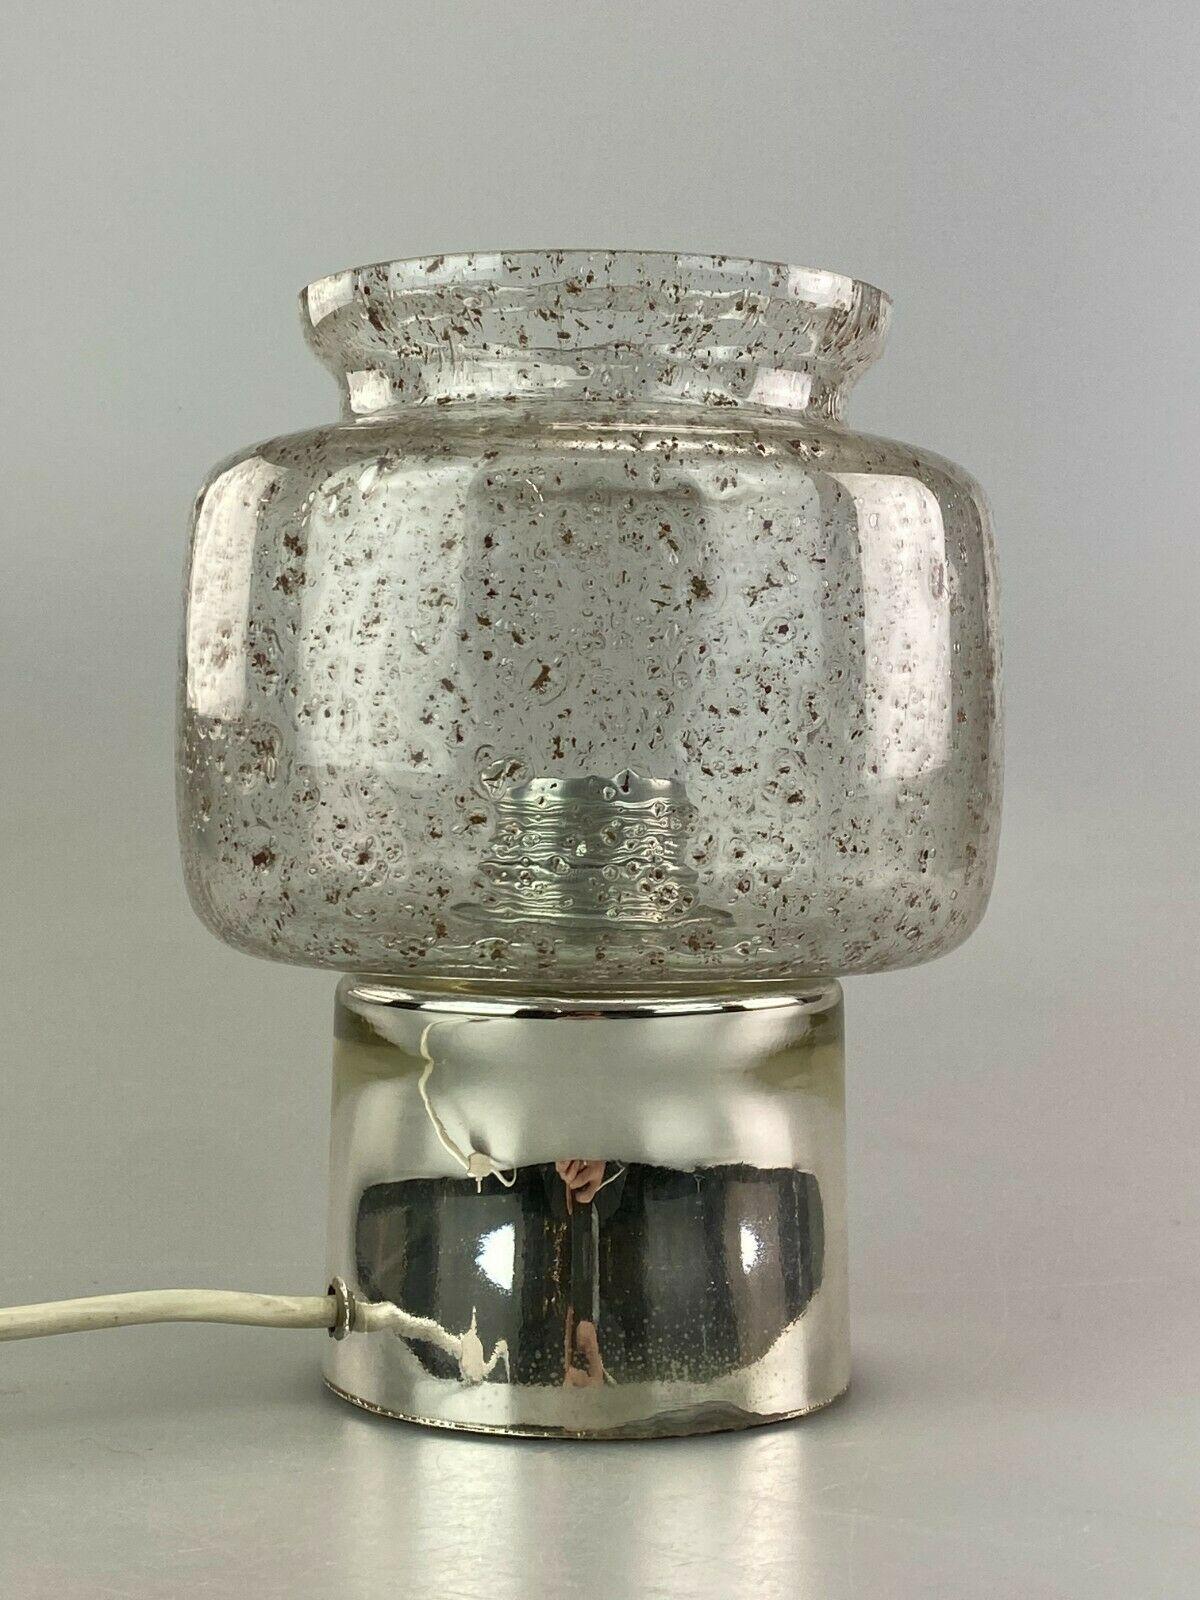 Metal 60s 70s Ball Lamp Light Table Lamp Bedside Lamp Space Age Design